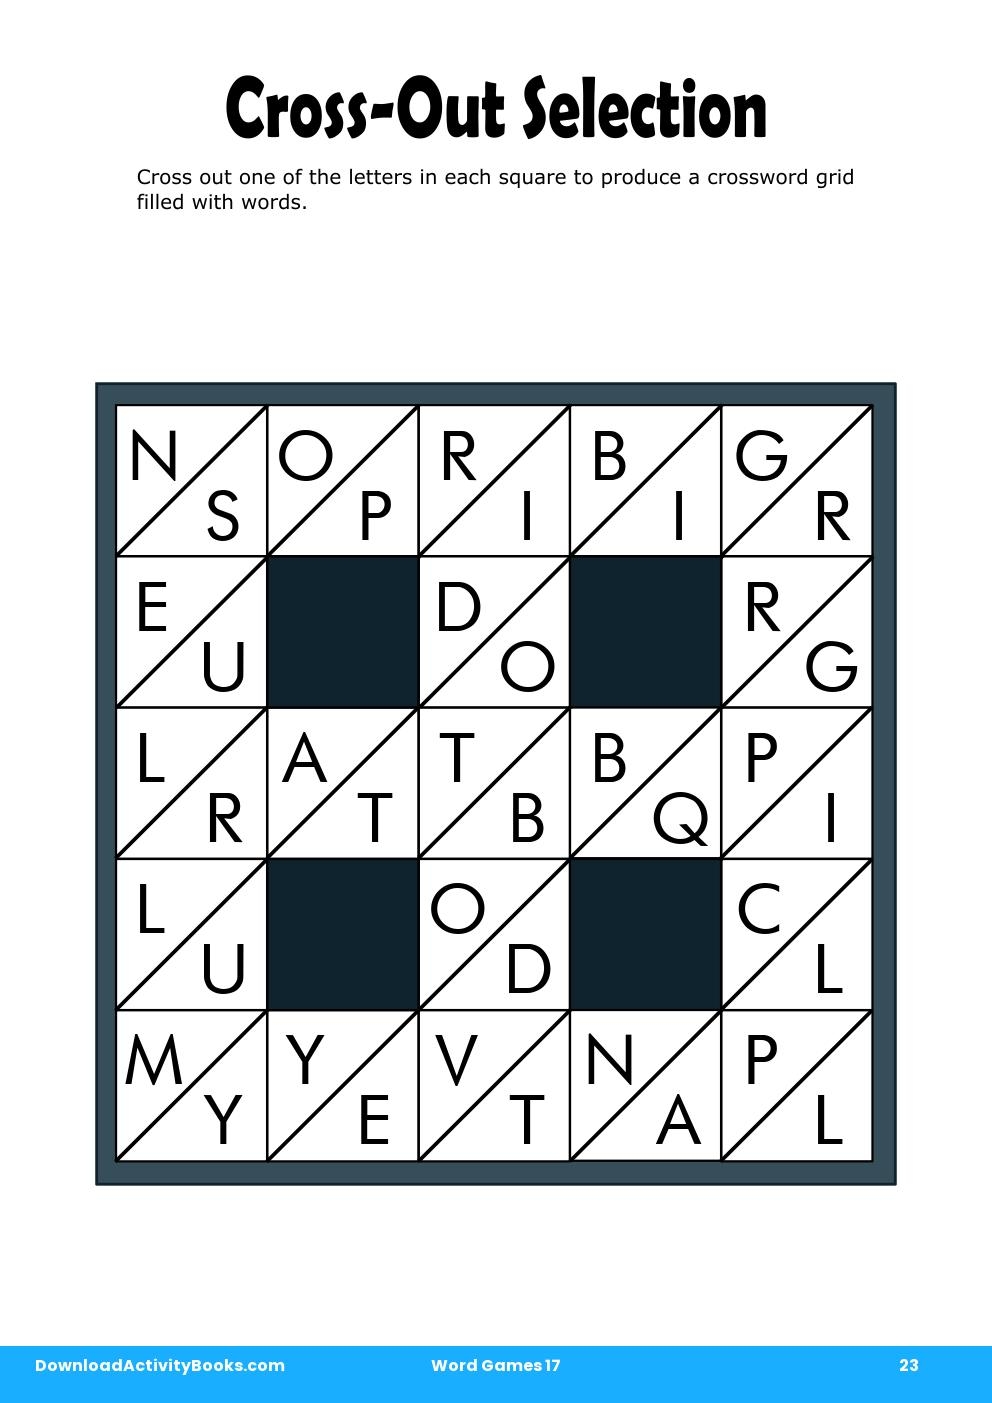 Cross-Out Selection in Word Games 17